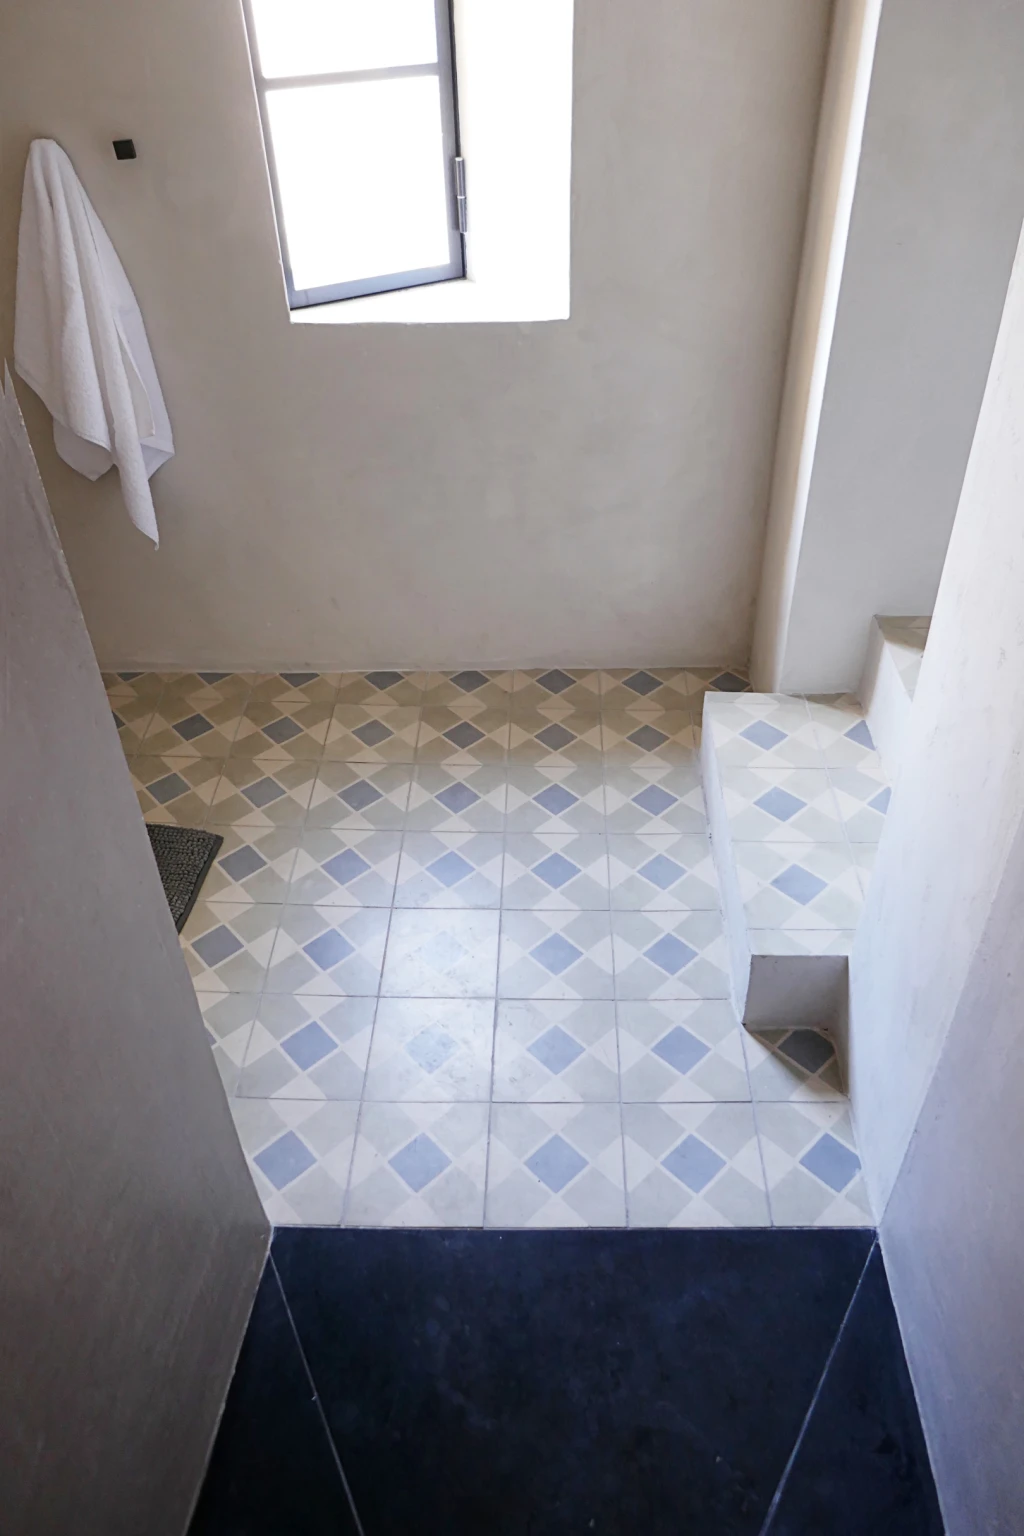 The tile floors are original flooring throughout